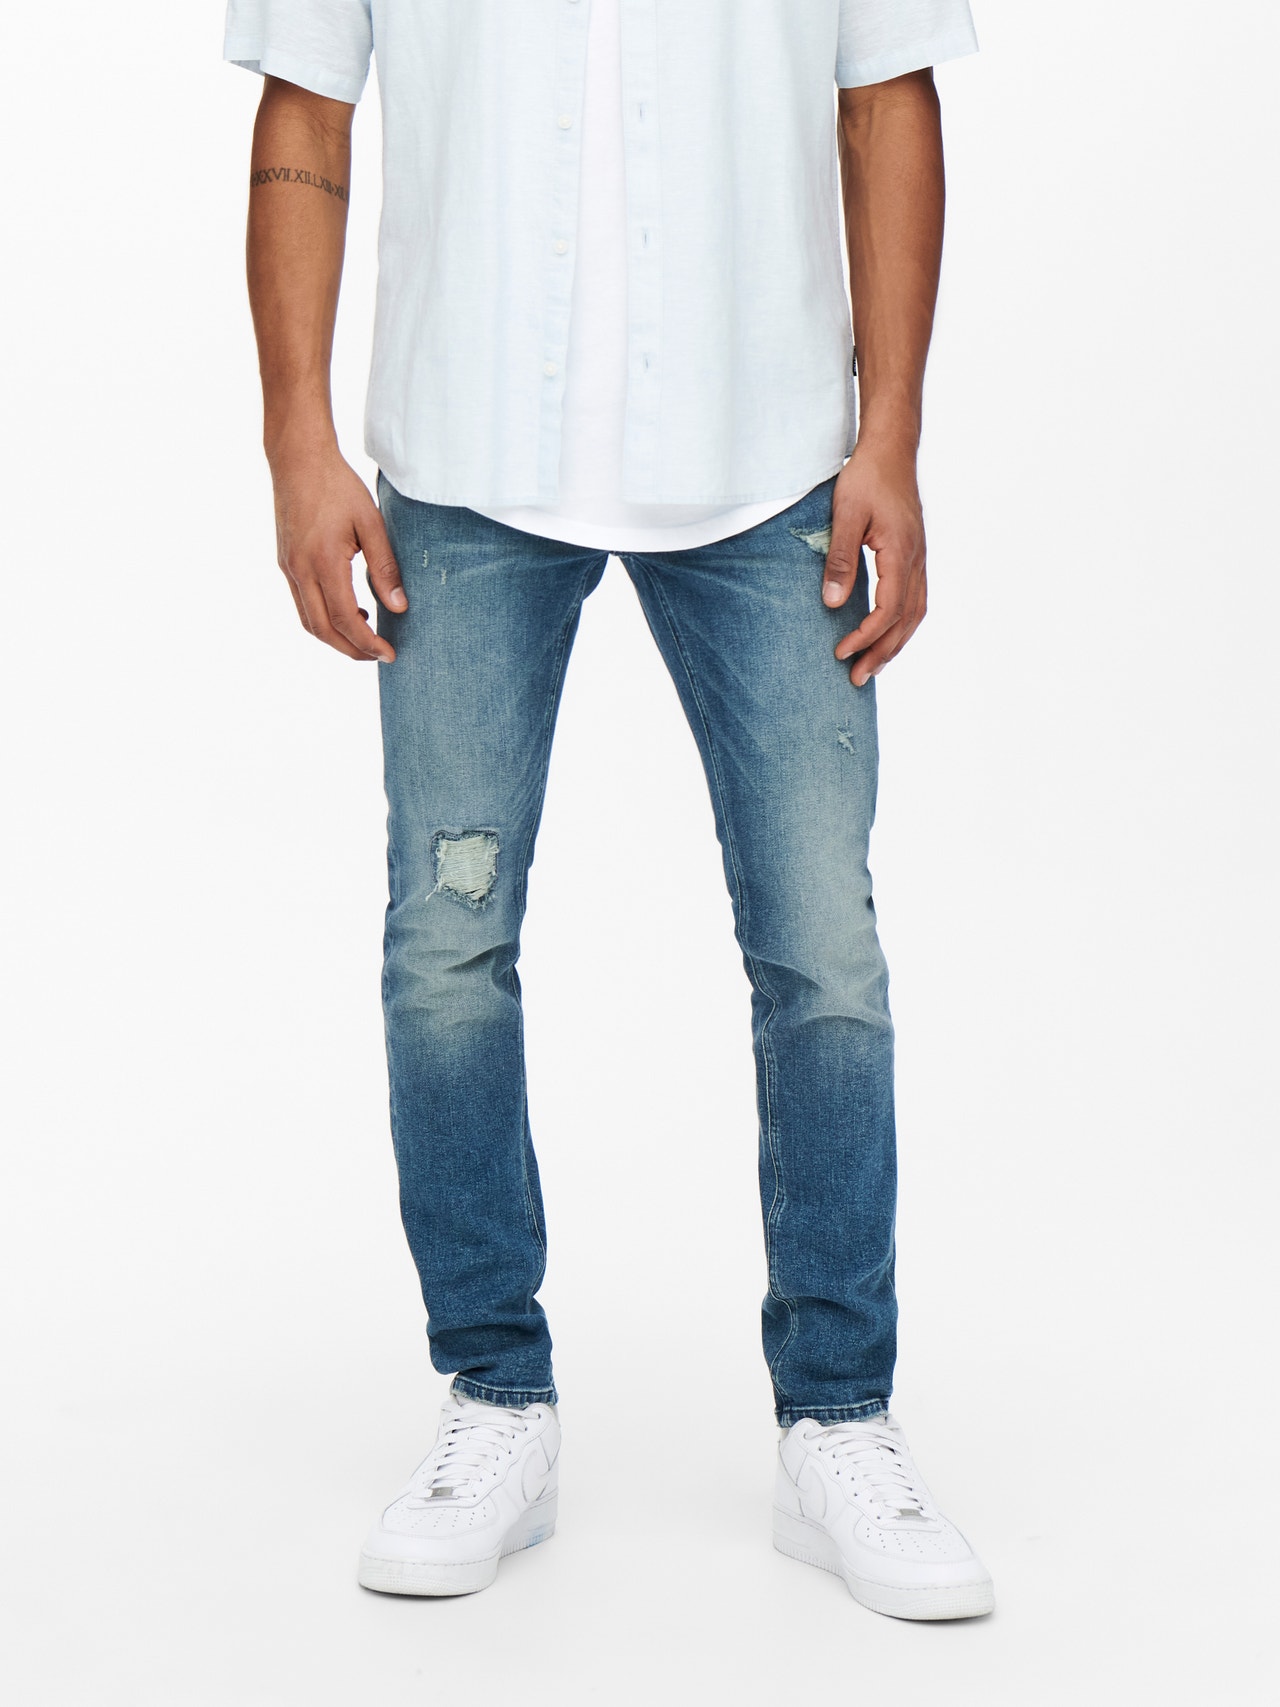 ONLY & SONS Jeans Slim Fit Taille moyenne Ourlé destroy -Blue Denim - 22021423